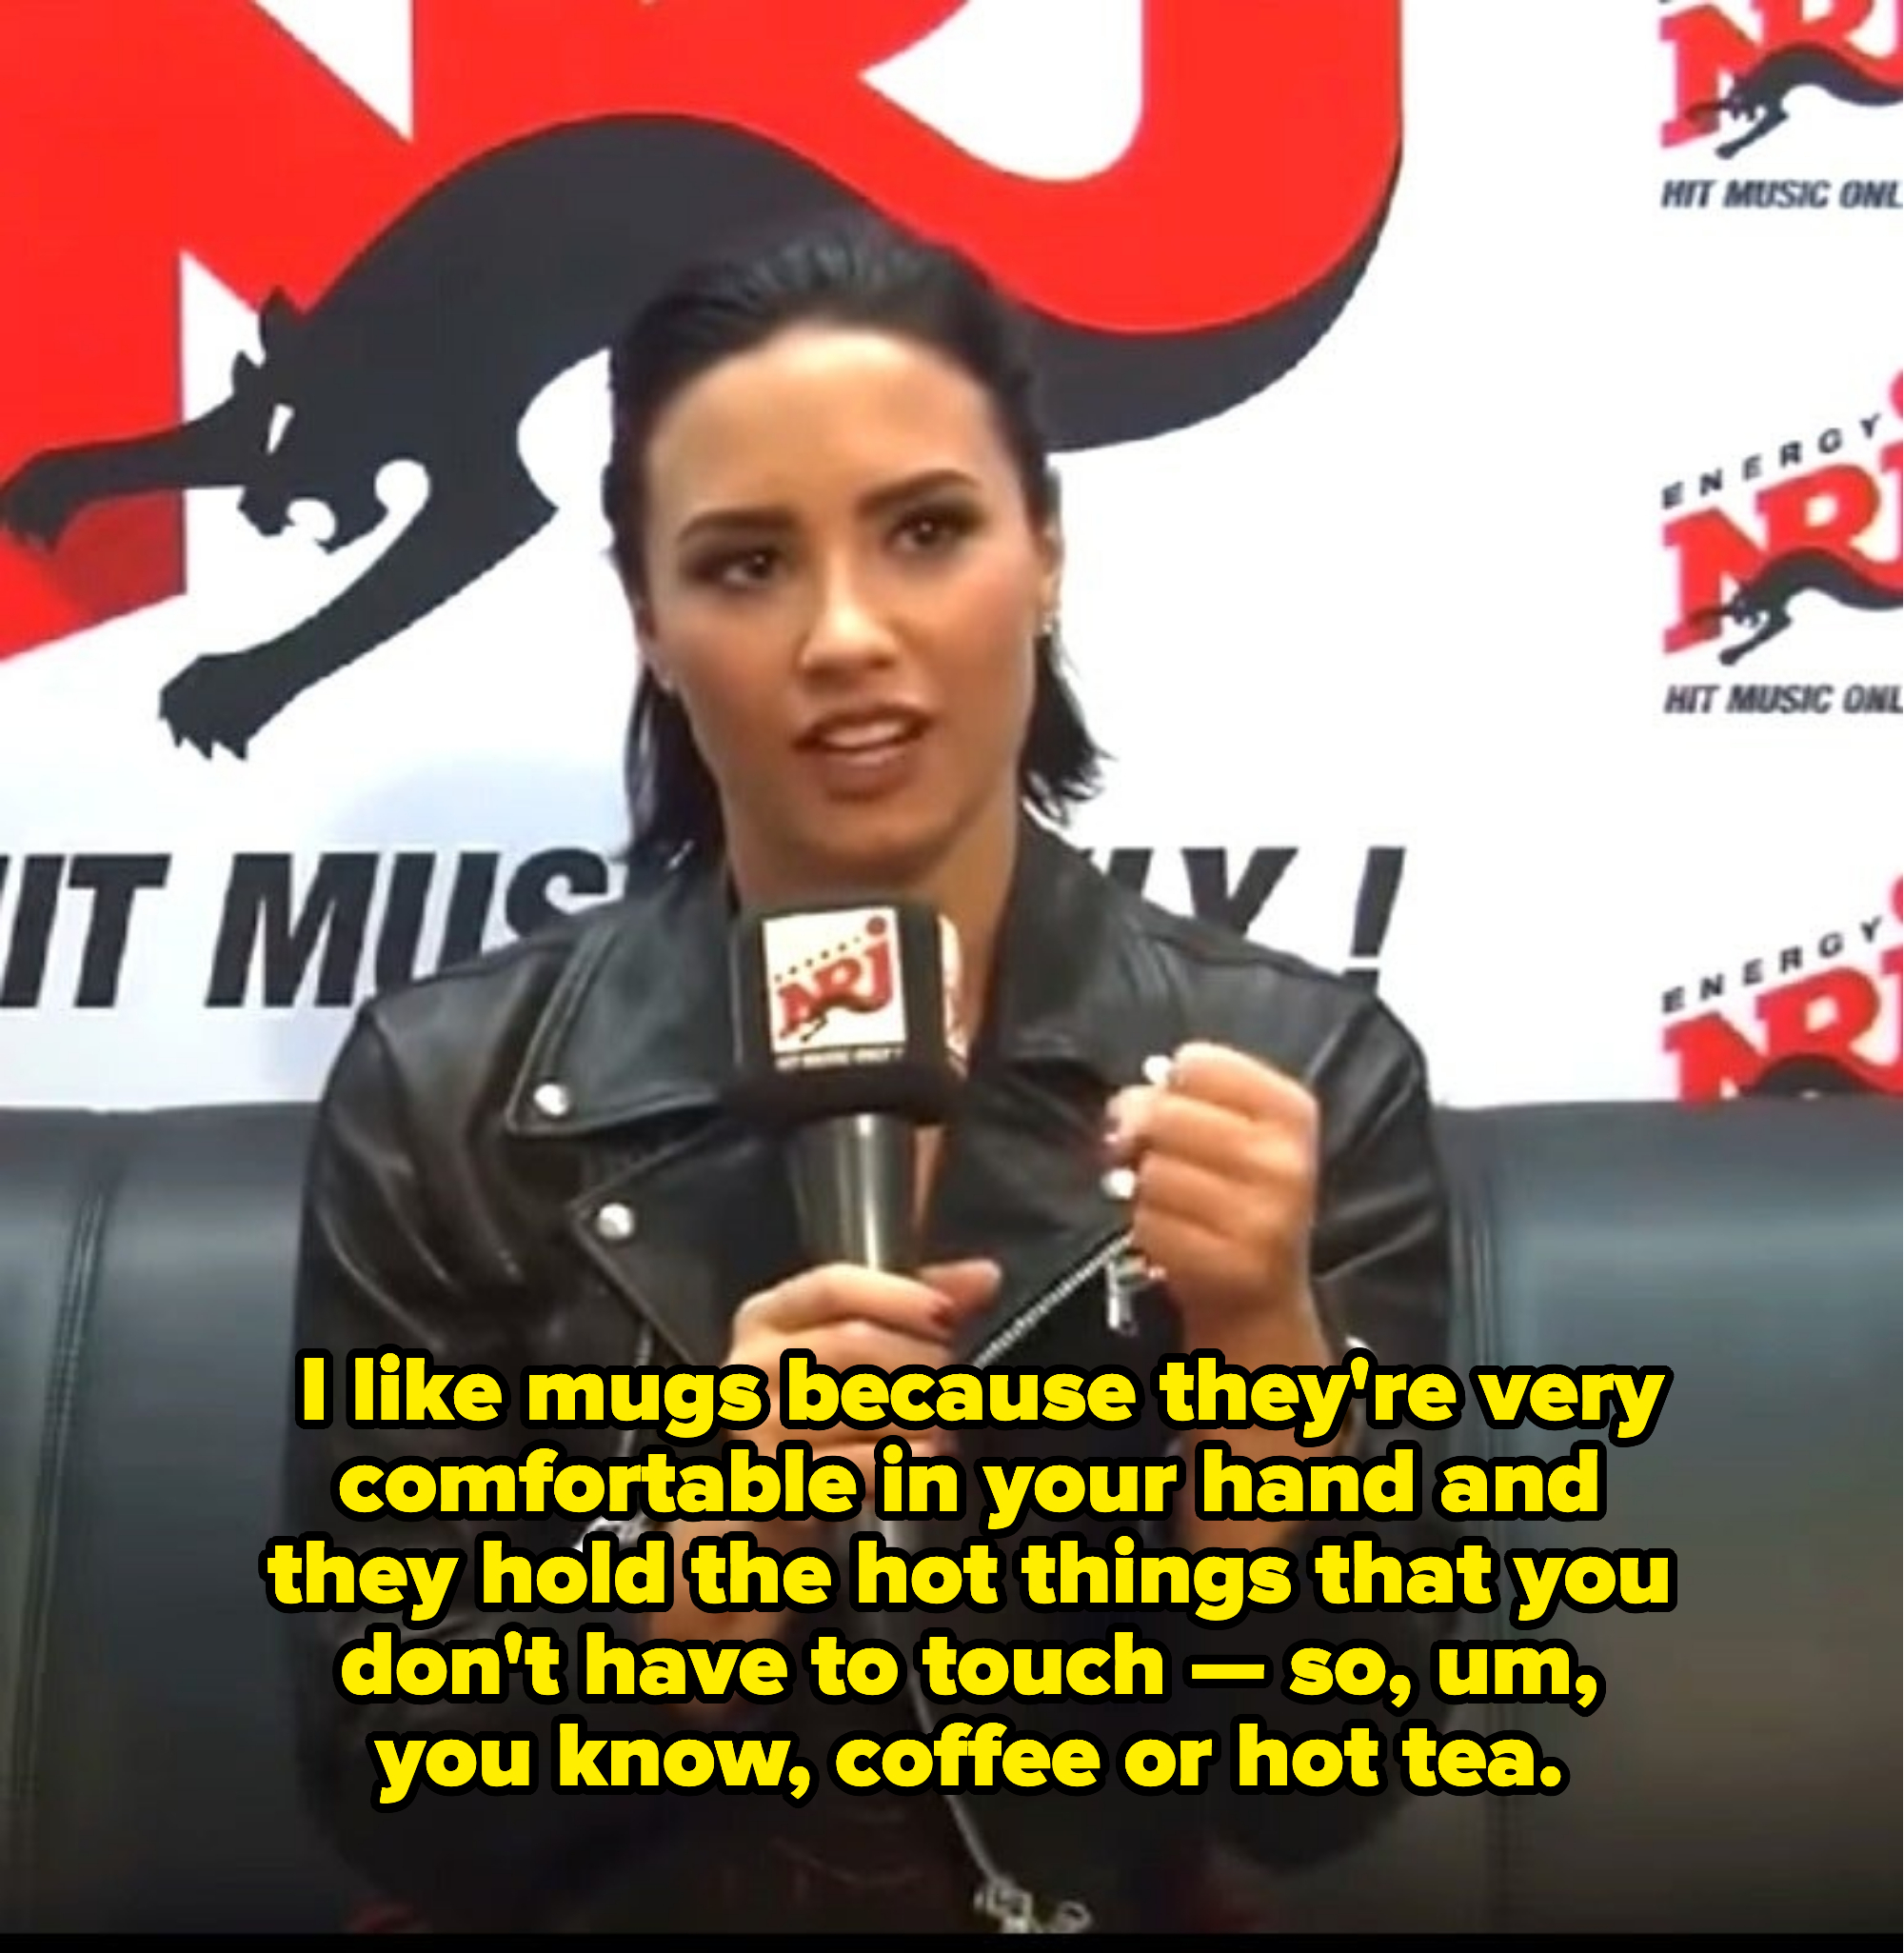 Demi&#x27;s response says &quot;I like mugs because they&#x27;re very comfortable in your hand and they hold the hot things that you don&#x27;t have to touch&quot;